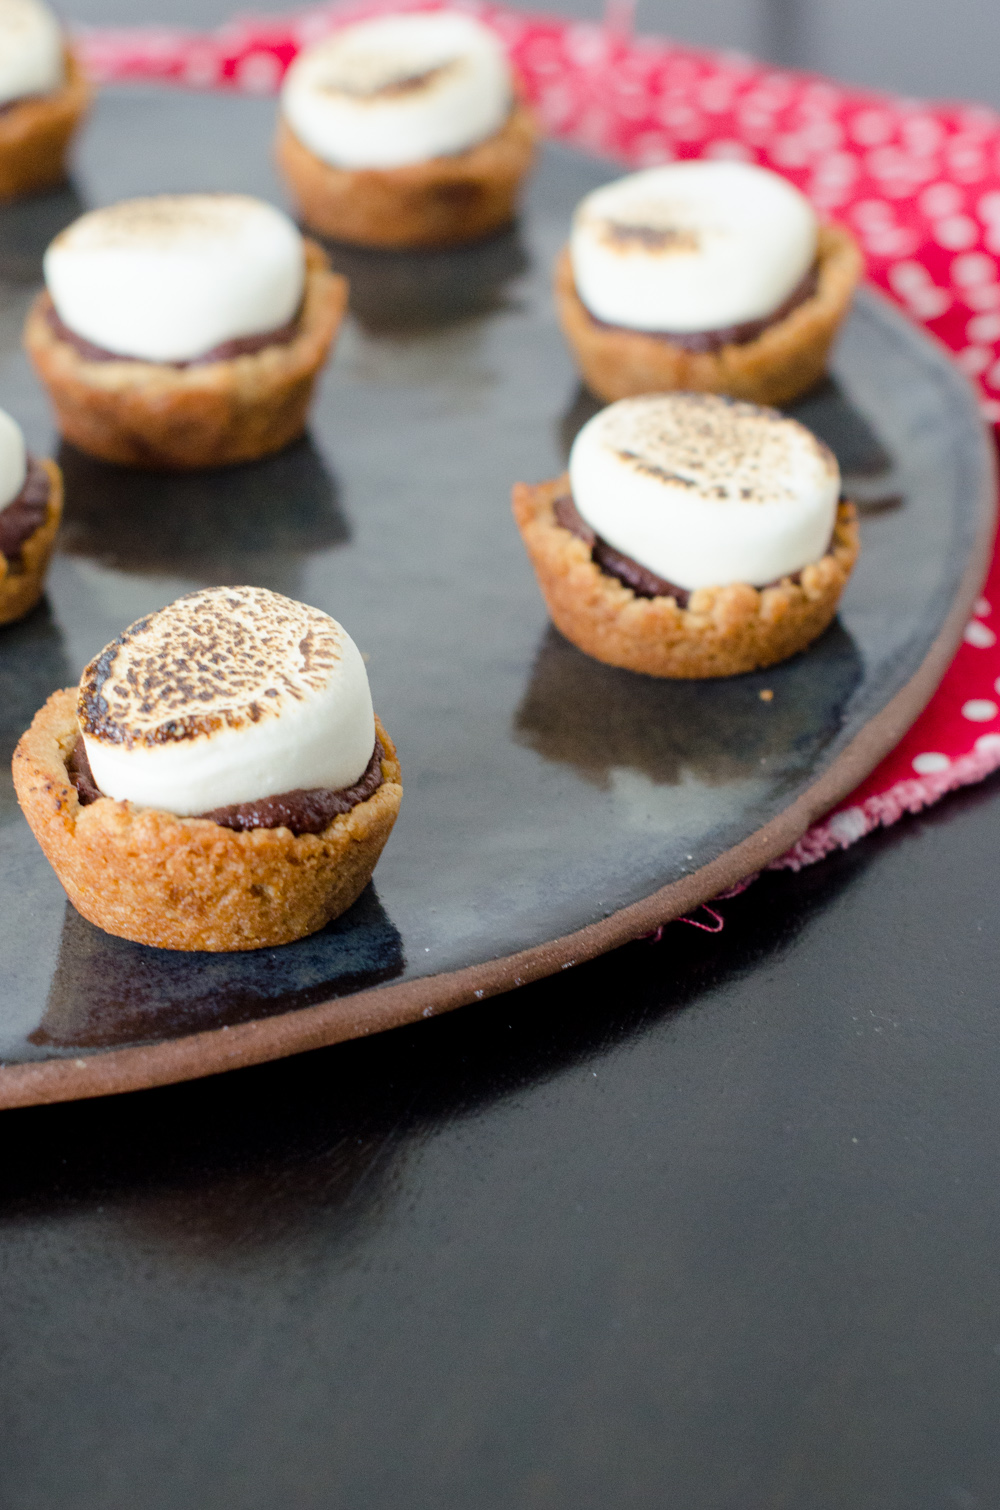 S'mores Cookie Cups recipe from ChefSarahElizabeth.com